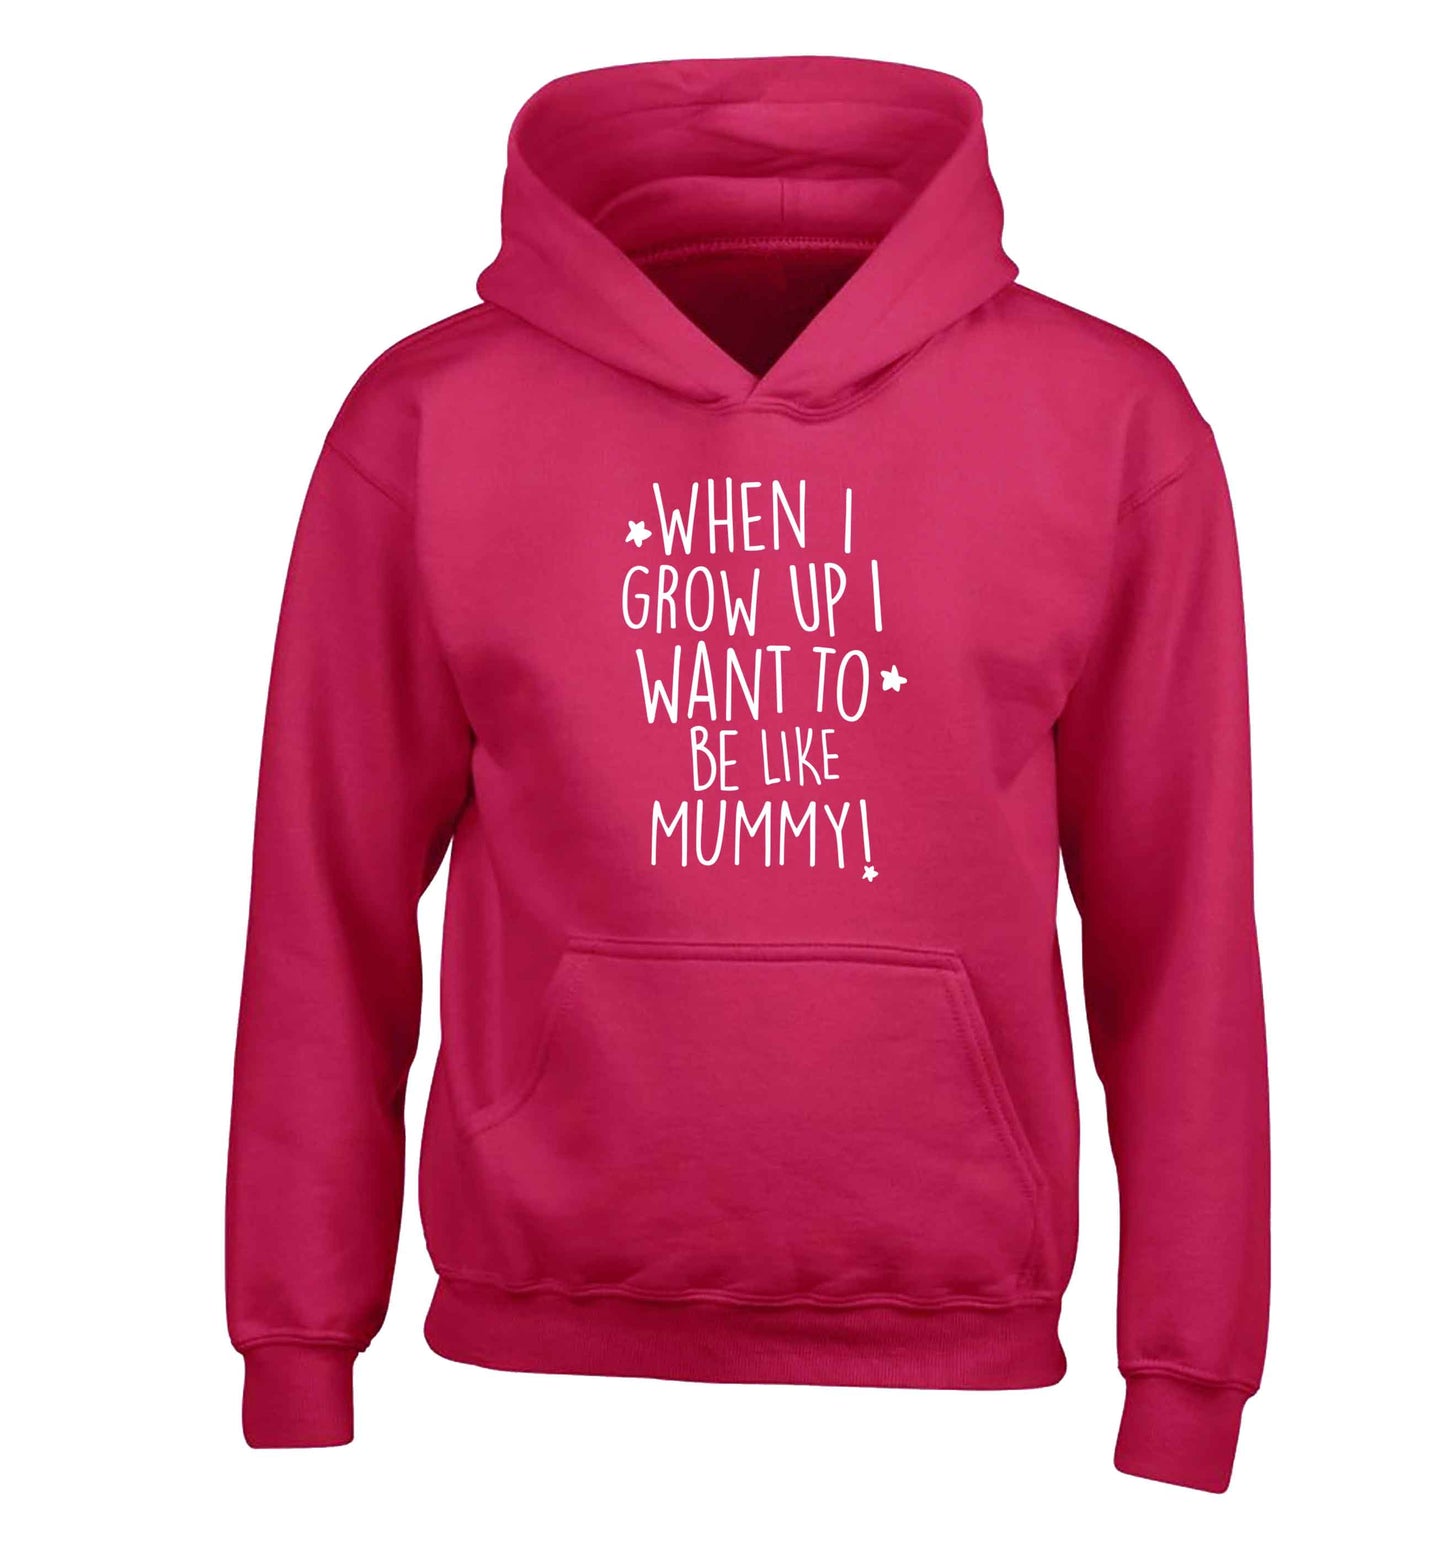 When I grow up I want to be like my mummy children's pink hoodie 12-13 Years